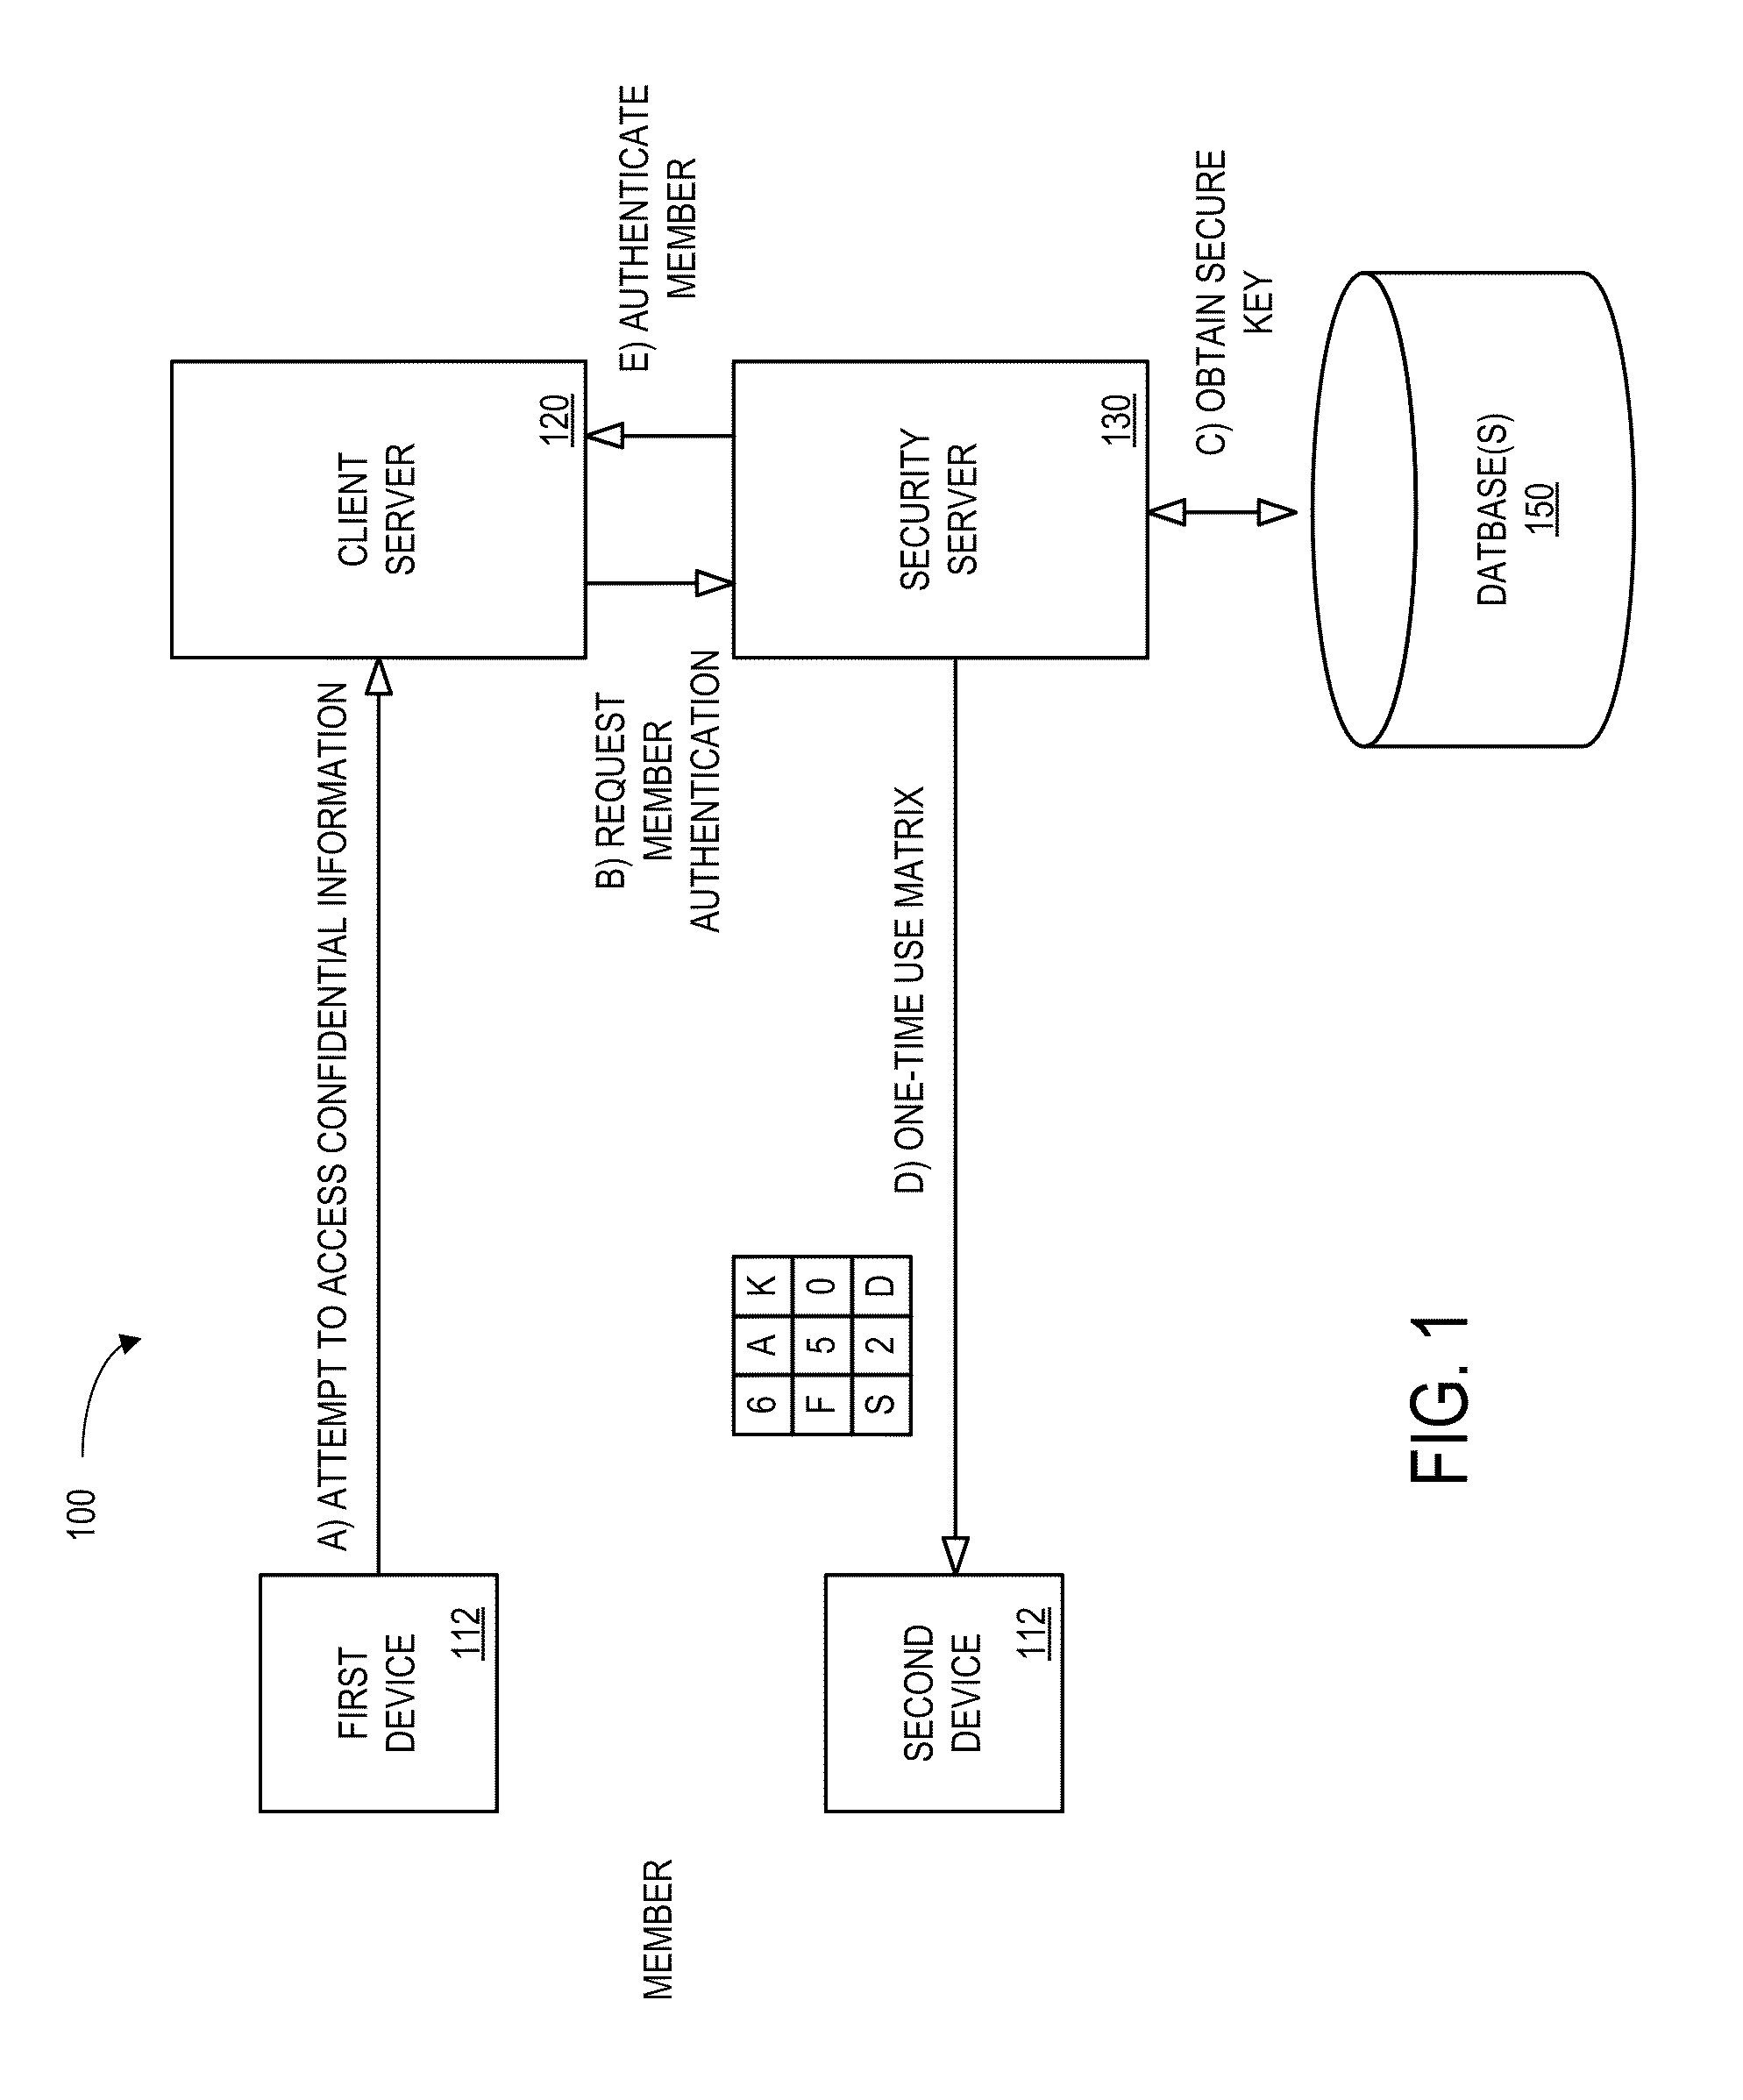 Methods and systems for secure key entry via communication networks